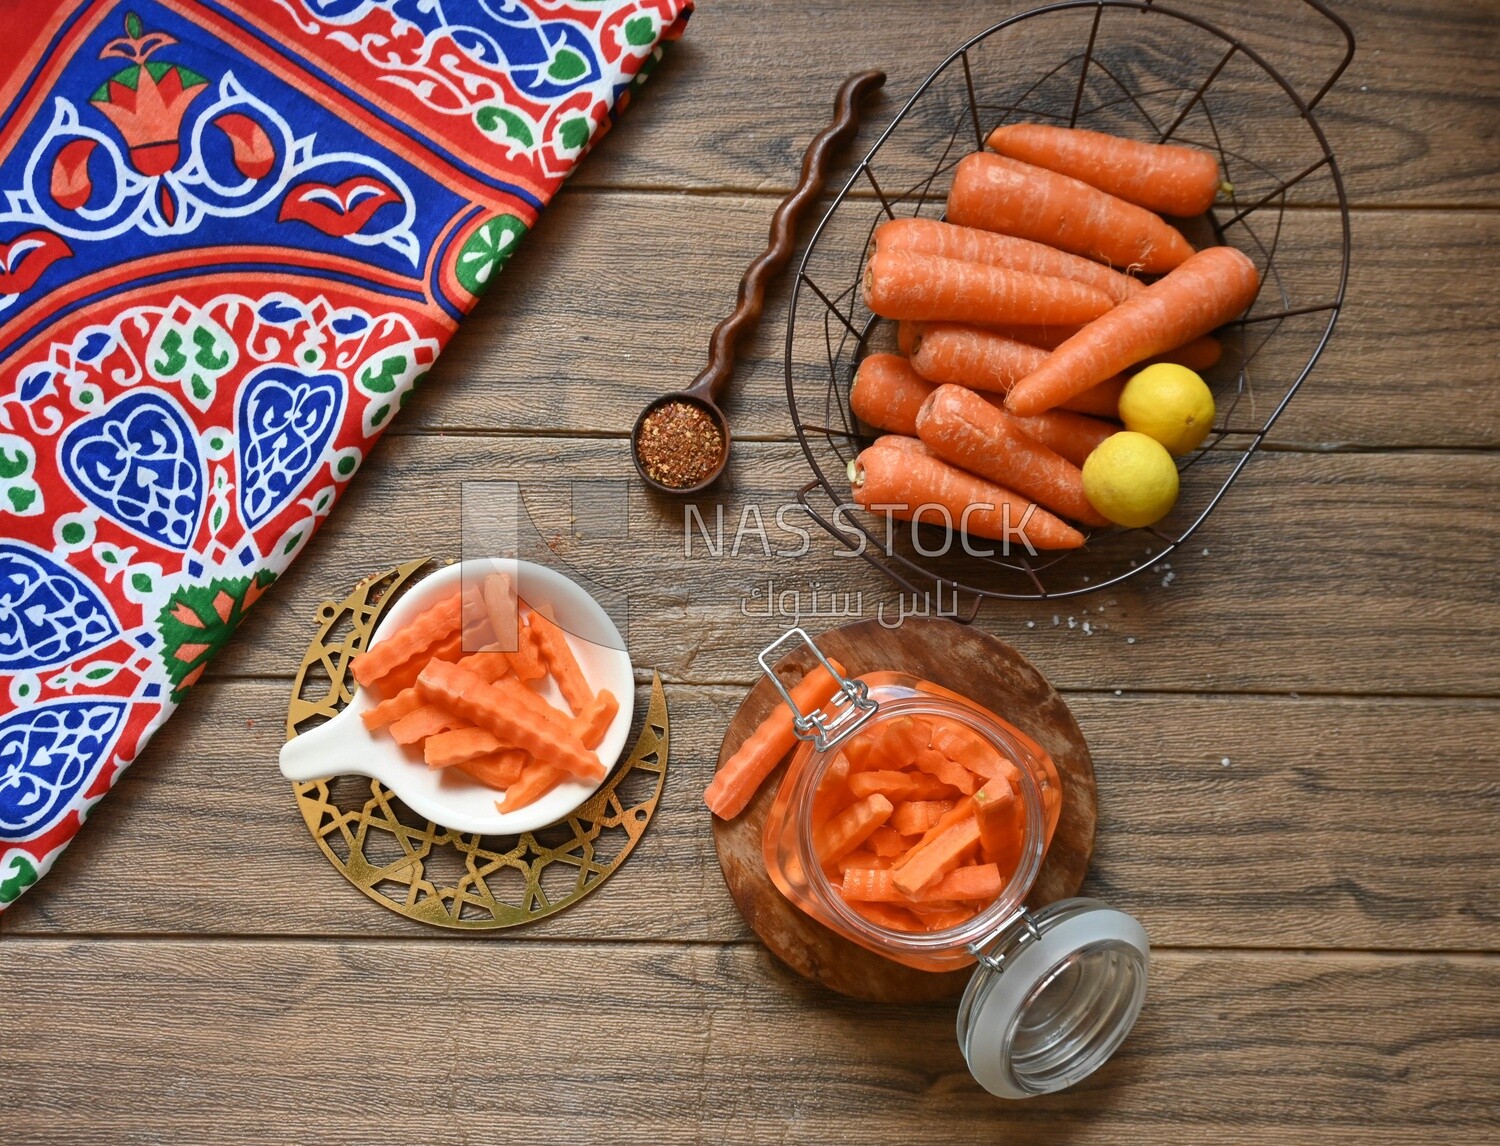 Jar of pickled carrots, a bowl with carrots and lemon, Egyptian pickles, Arab restaurants